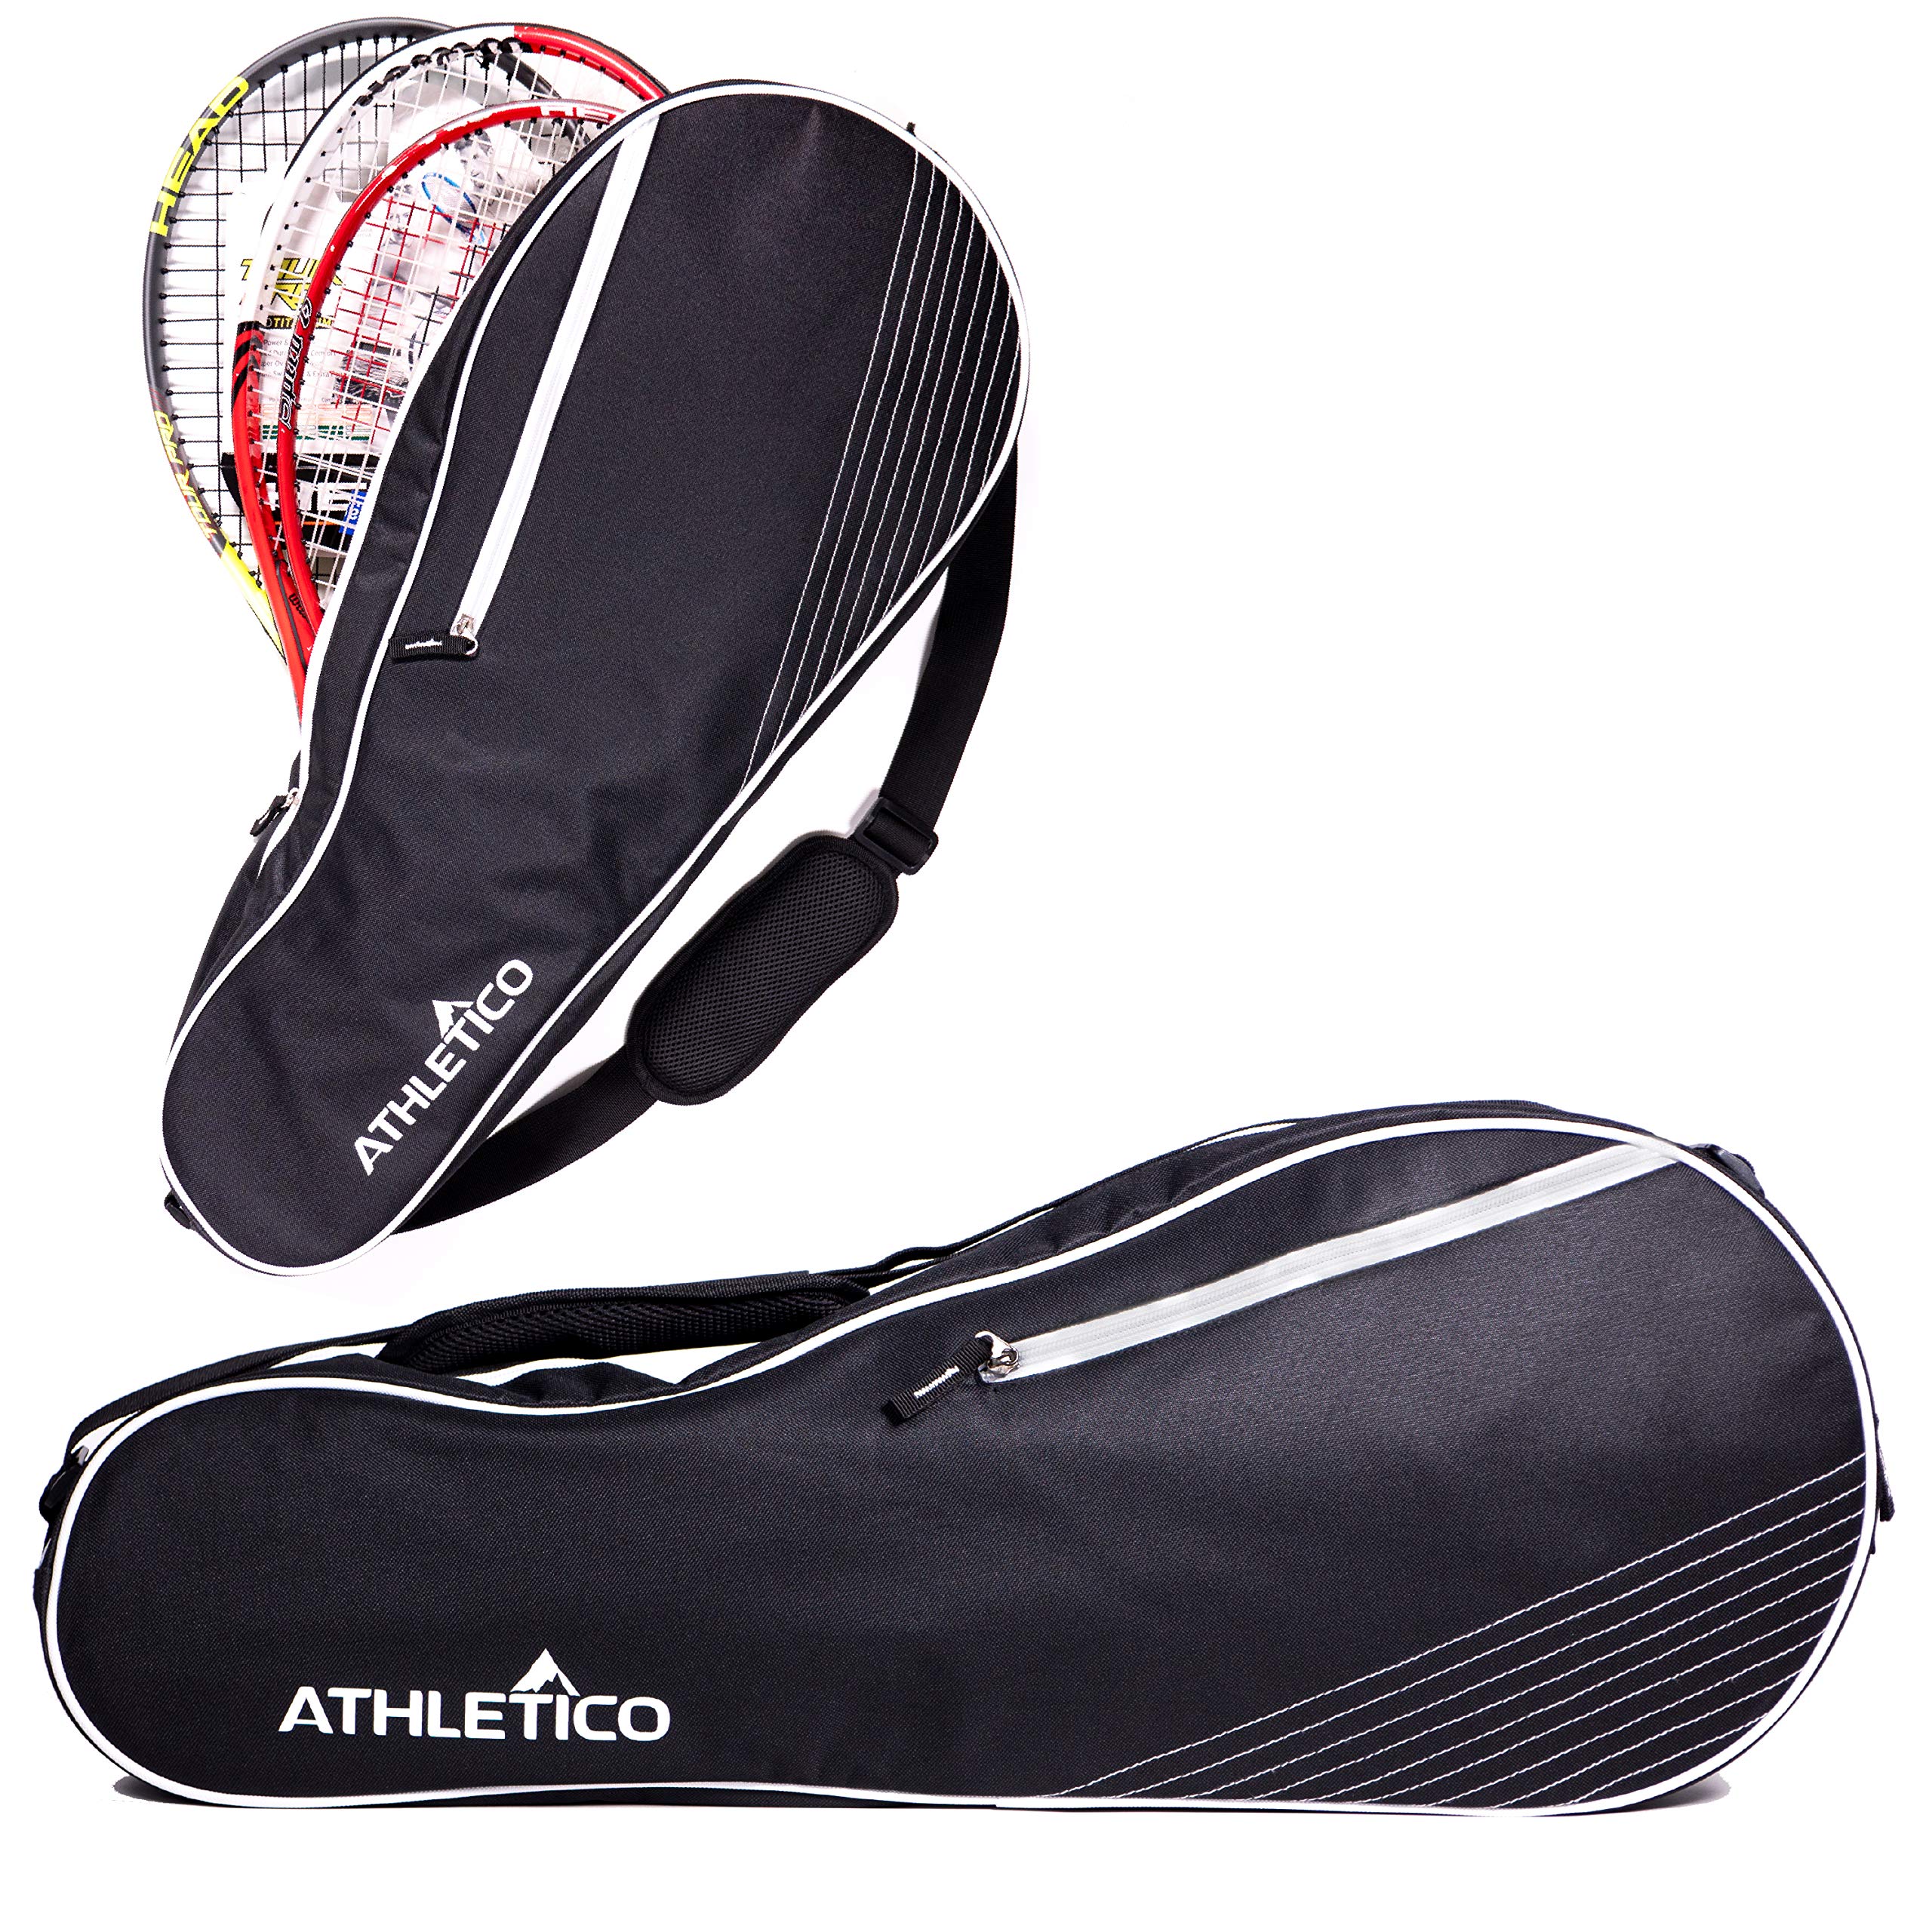 Athletico 3 Racquet Tennis Bag | Padded to Protect Rackets & Lightweight | Professional or Beginner Tennis Players | Unisex Design for Men, Women, Youth and Adults (Black)  - Good